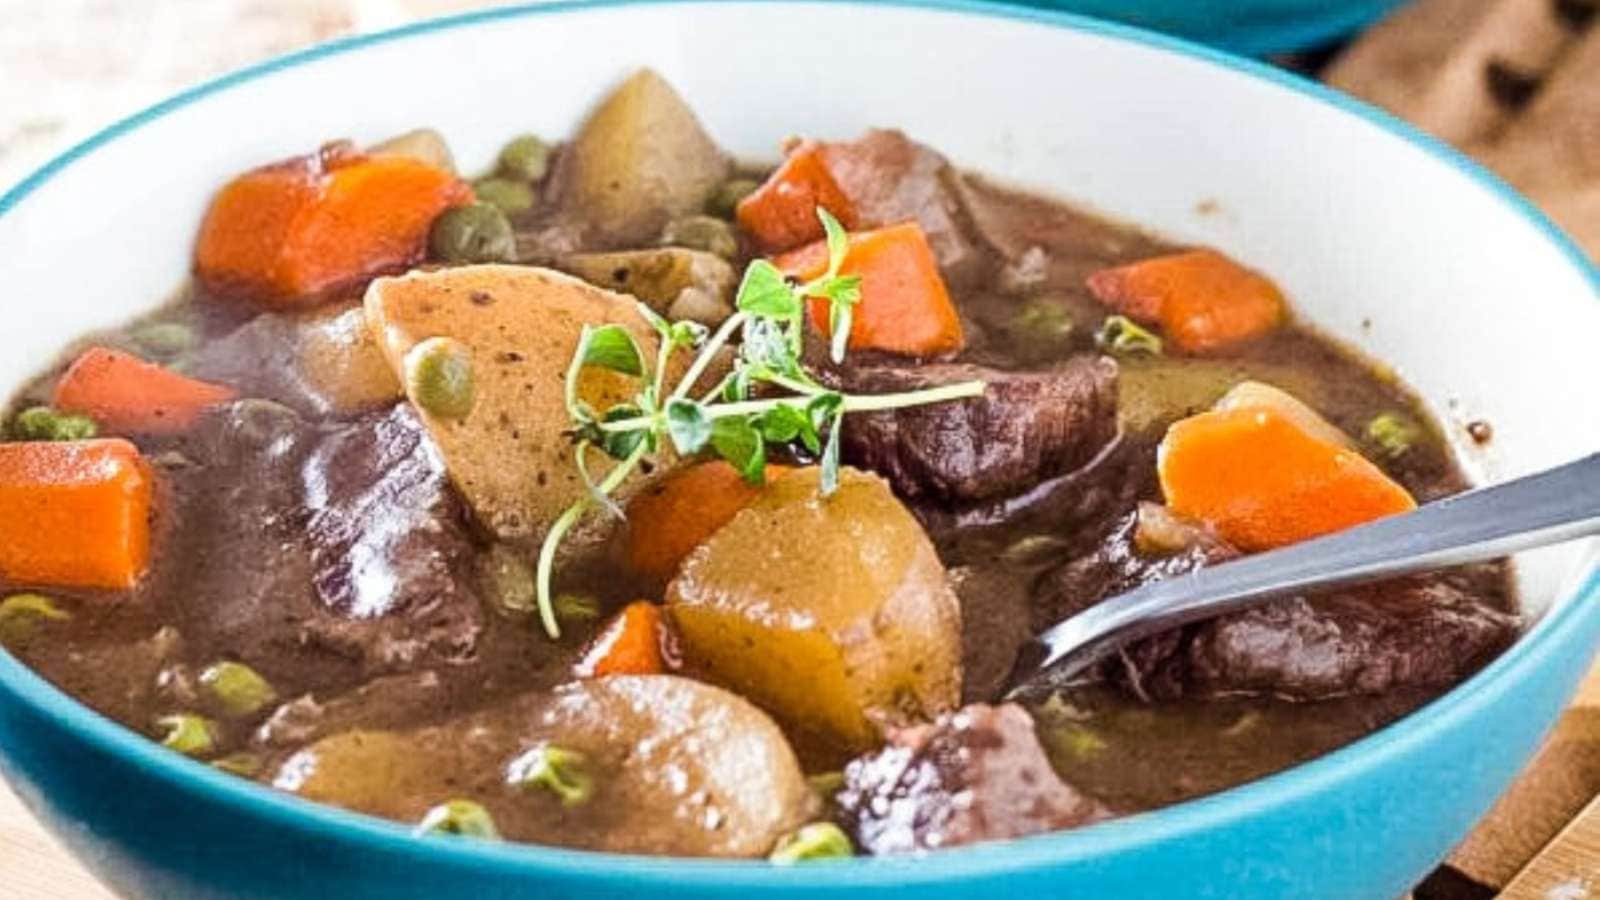 A bowl of beef stew made on the stovetop.